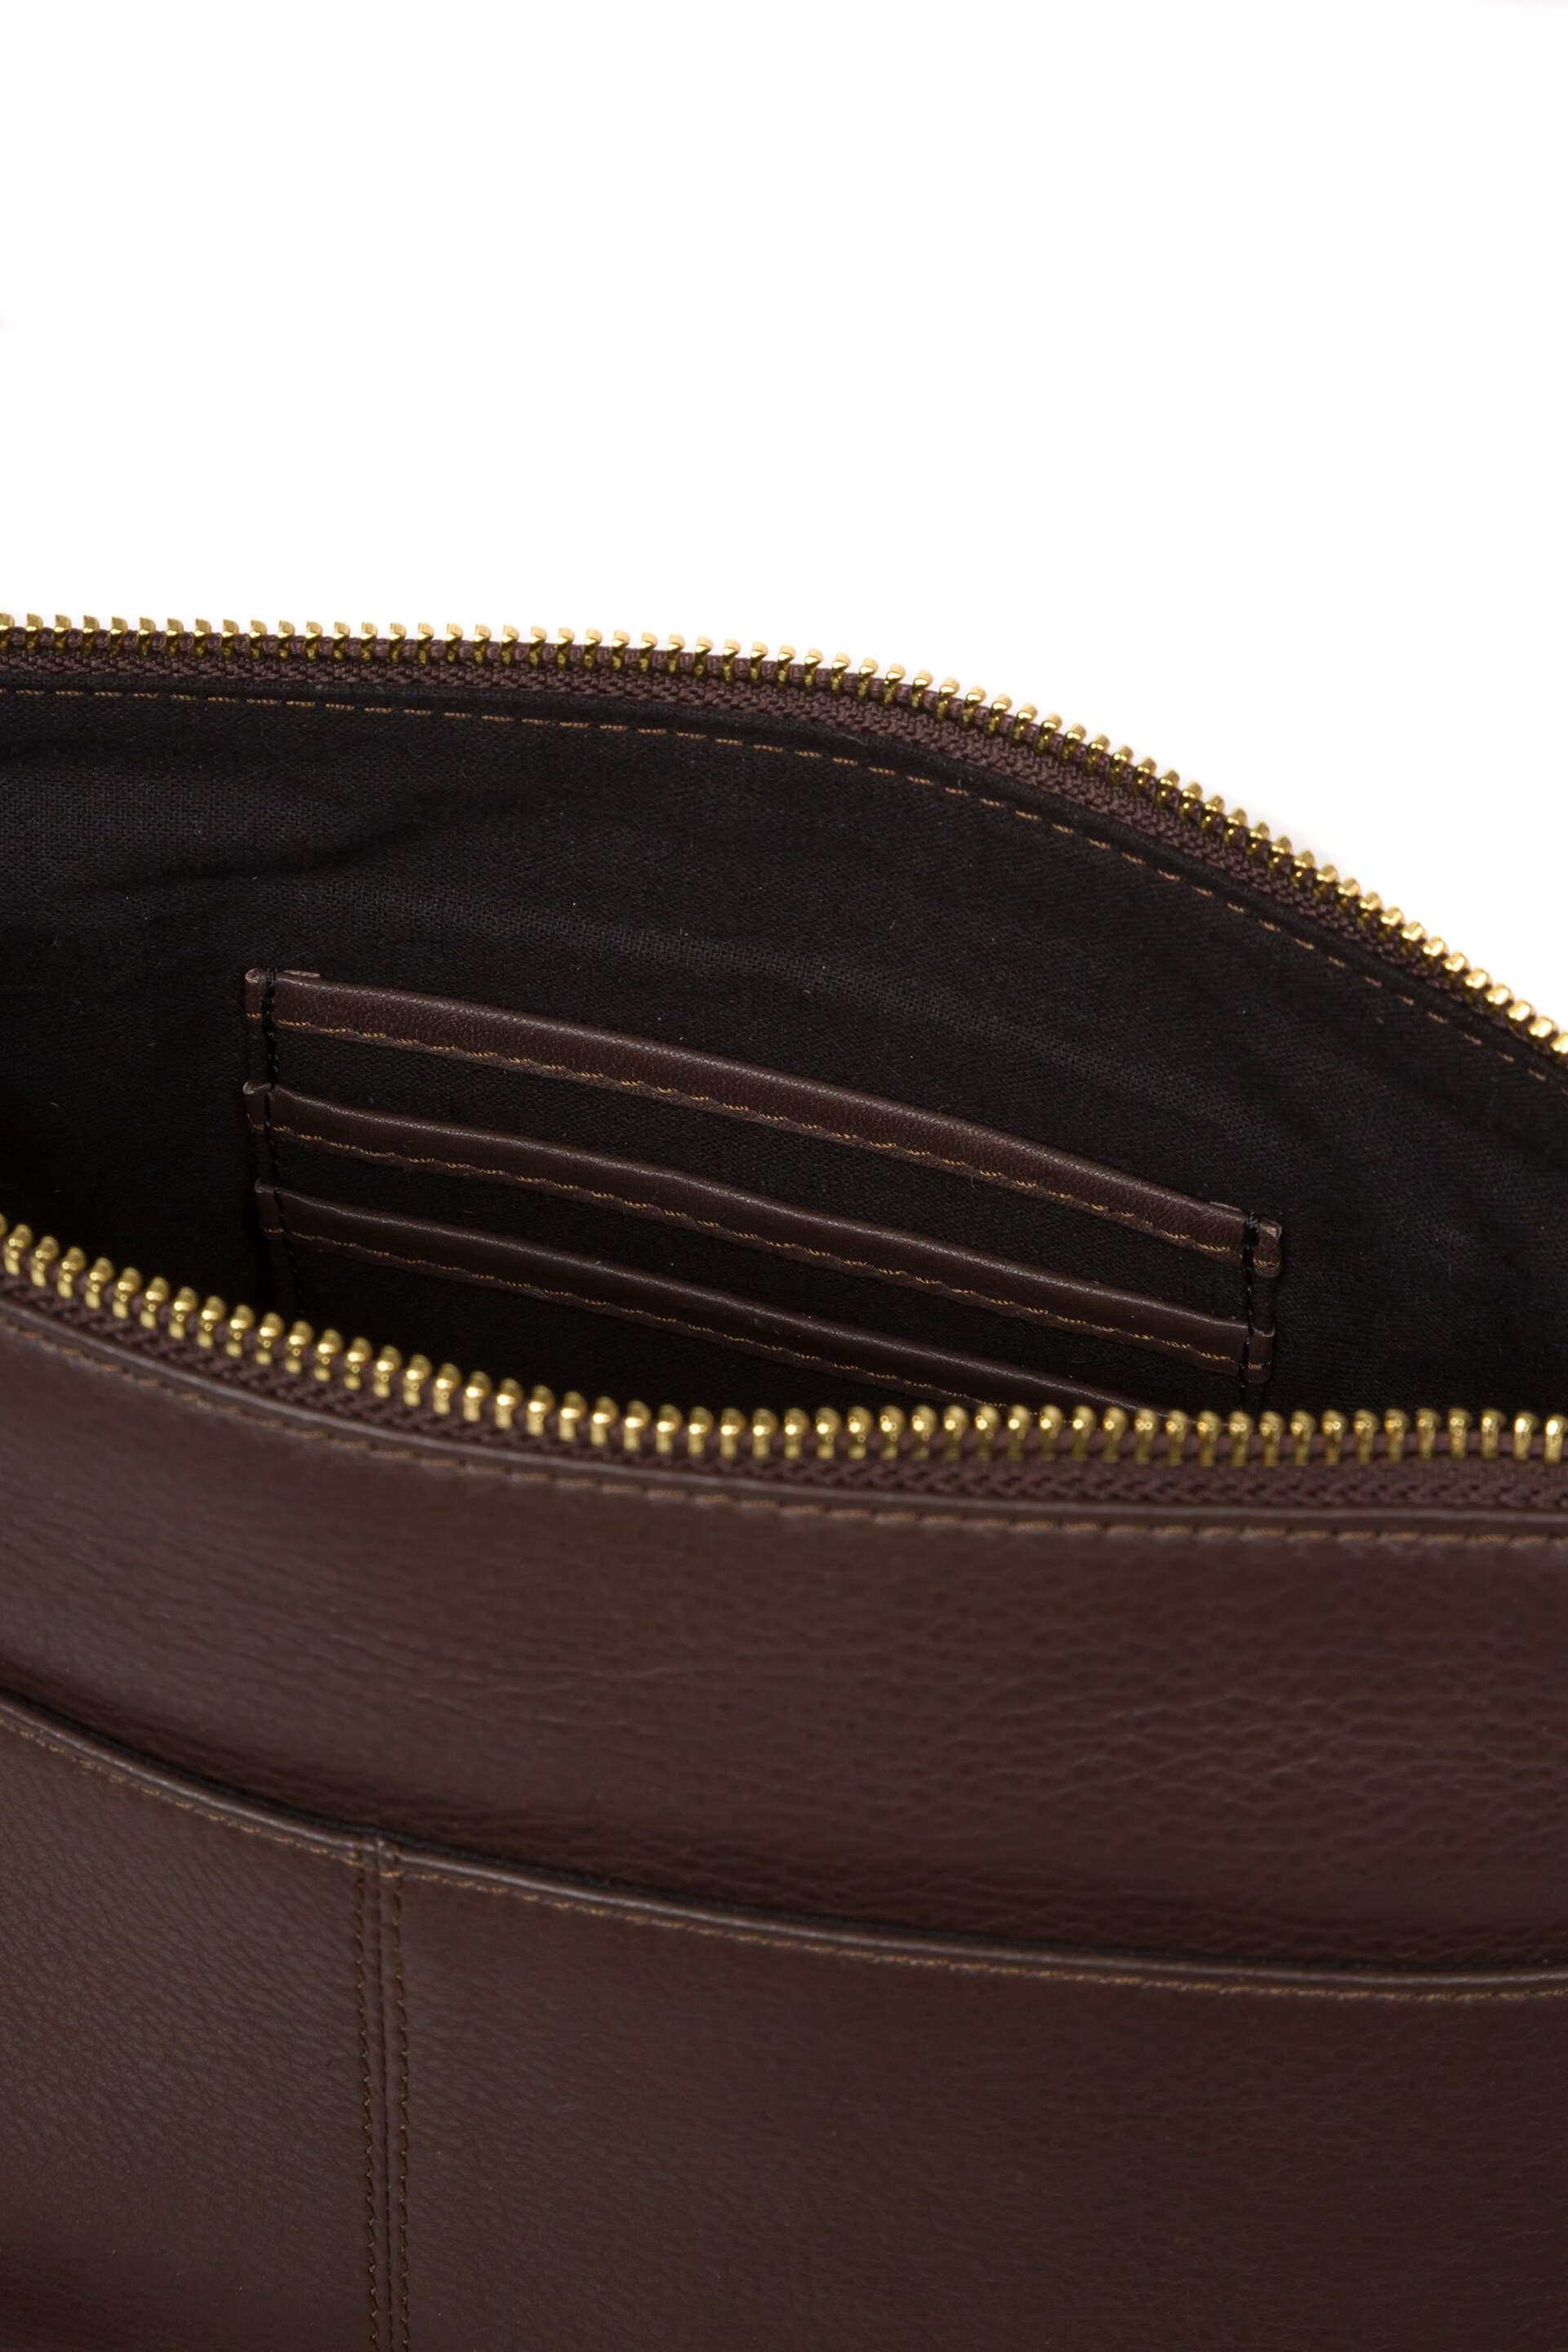 Pure Luxuries London Isabella Nappa Leather Grab Bag - Image 6 of 6